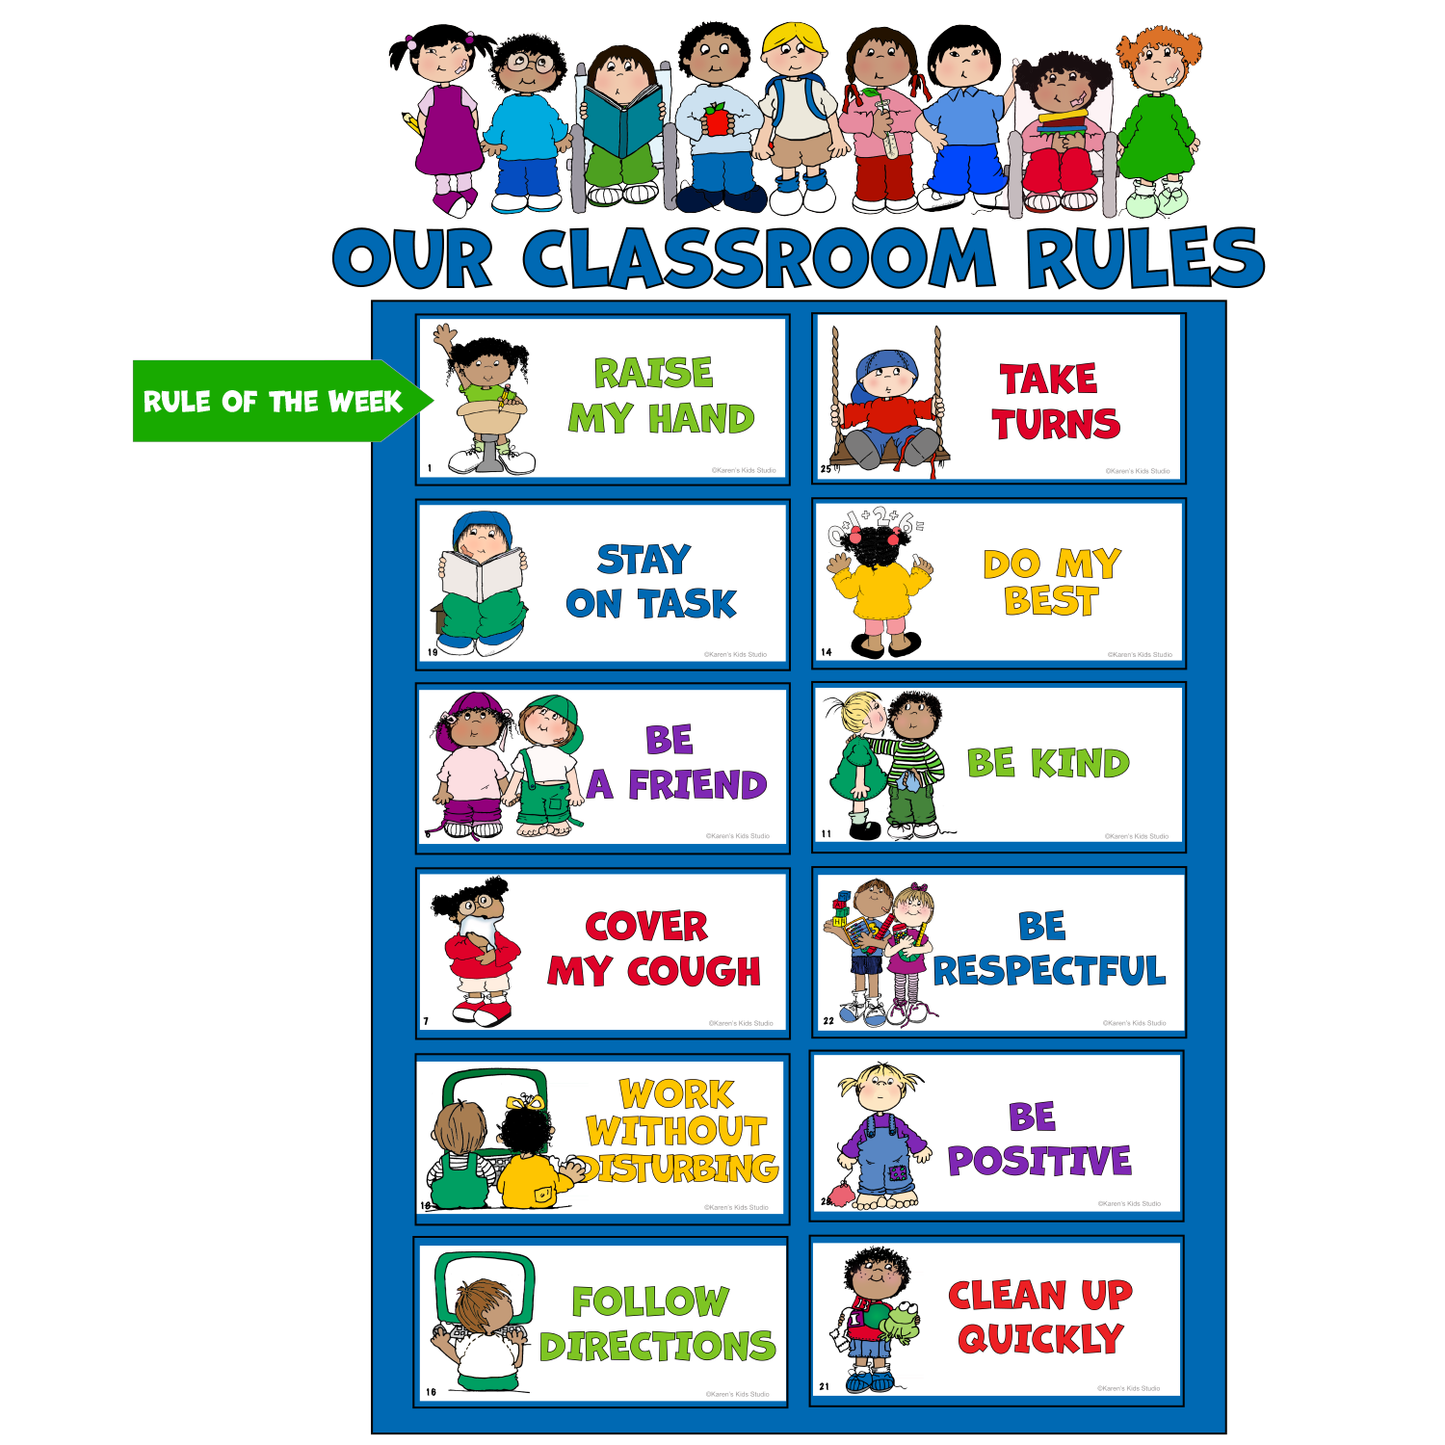 CLASSROOM EXPECTATIONS_RULES Bulletin Board I CAN Language (Karen's Kids Printables)